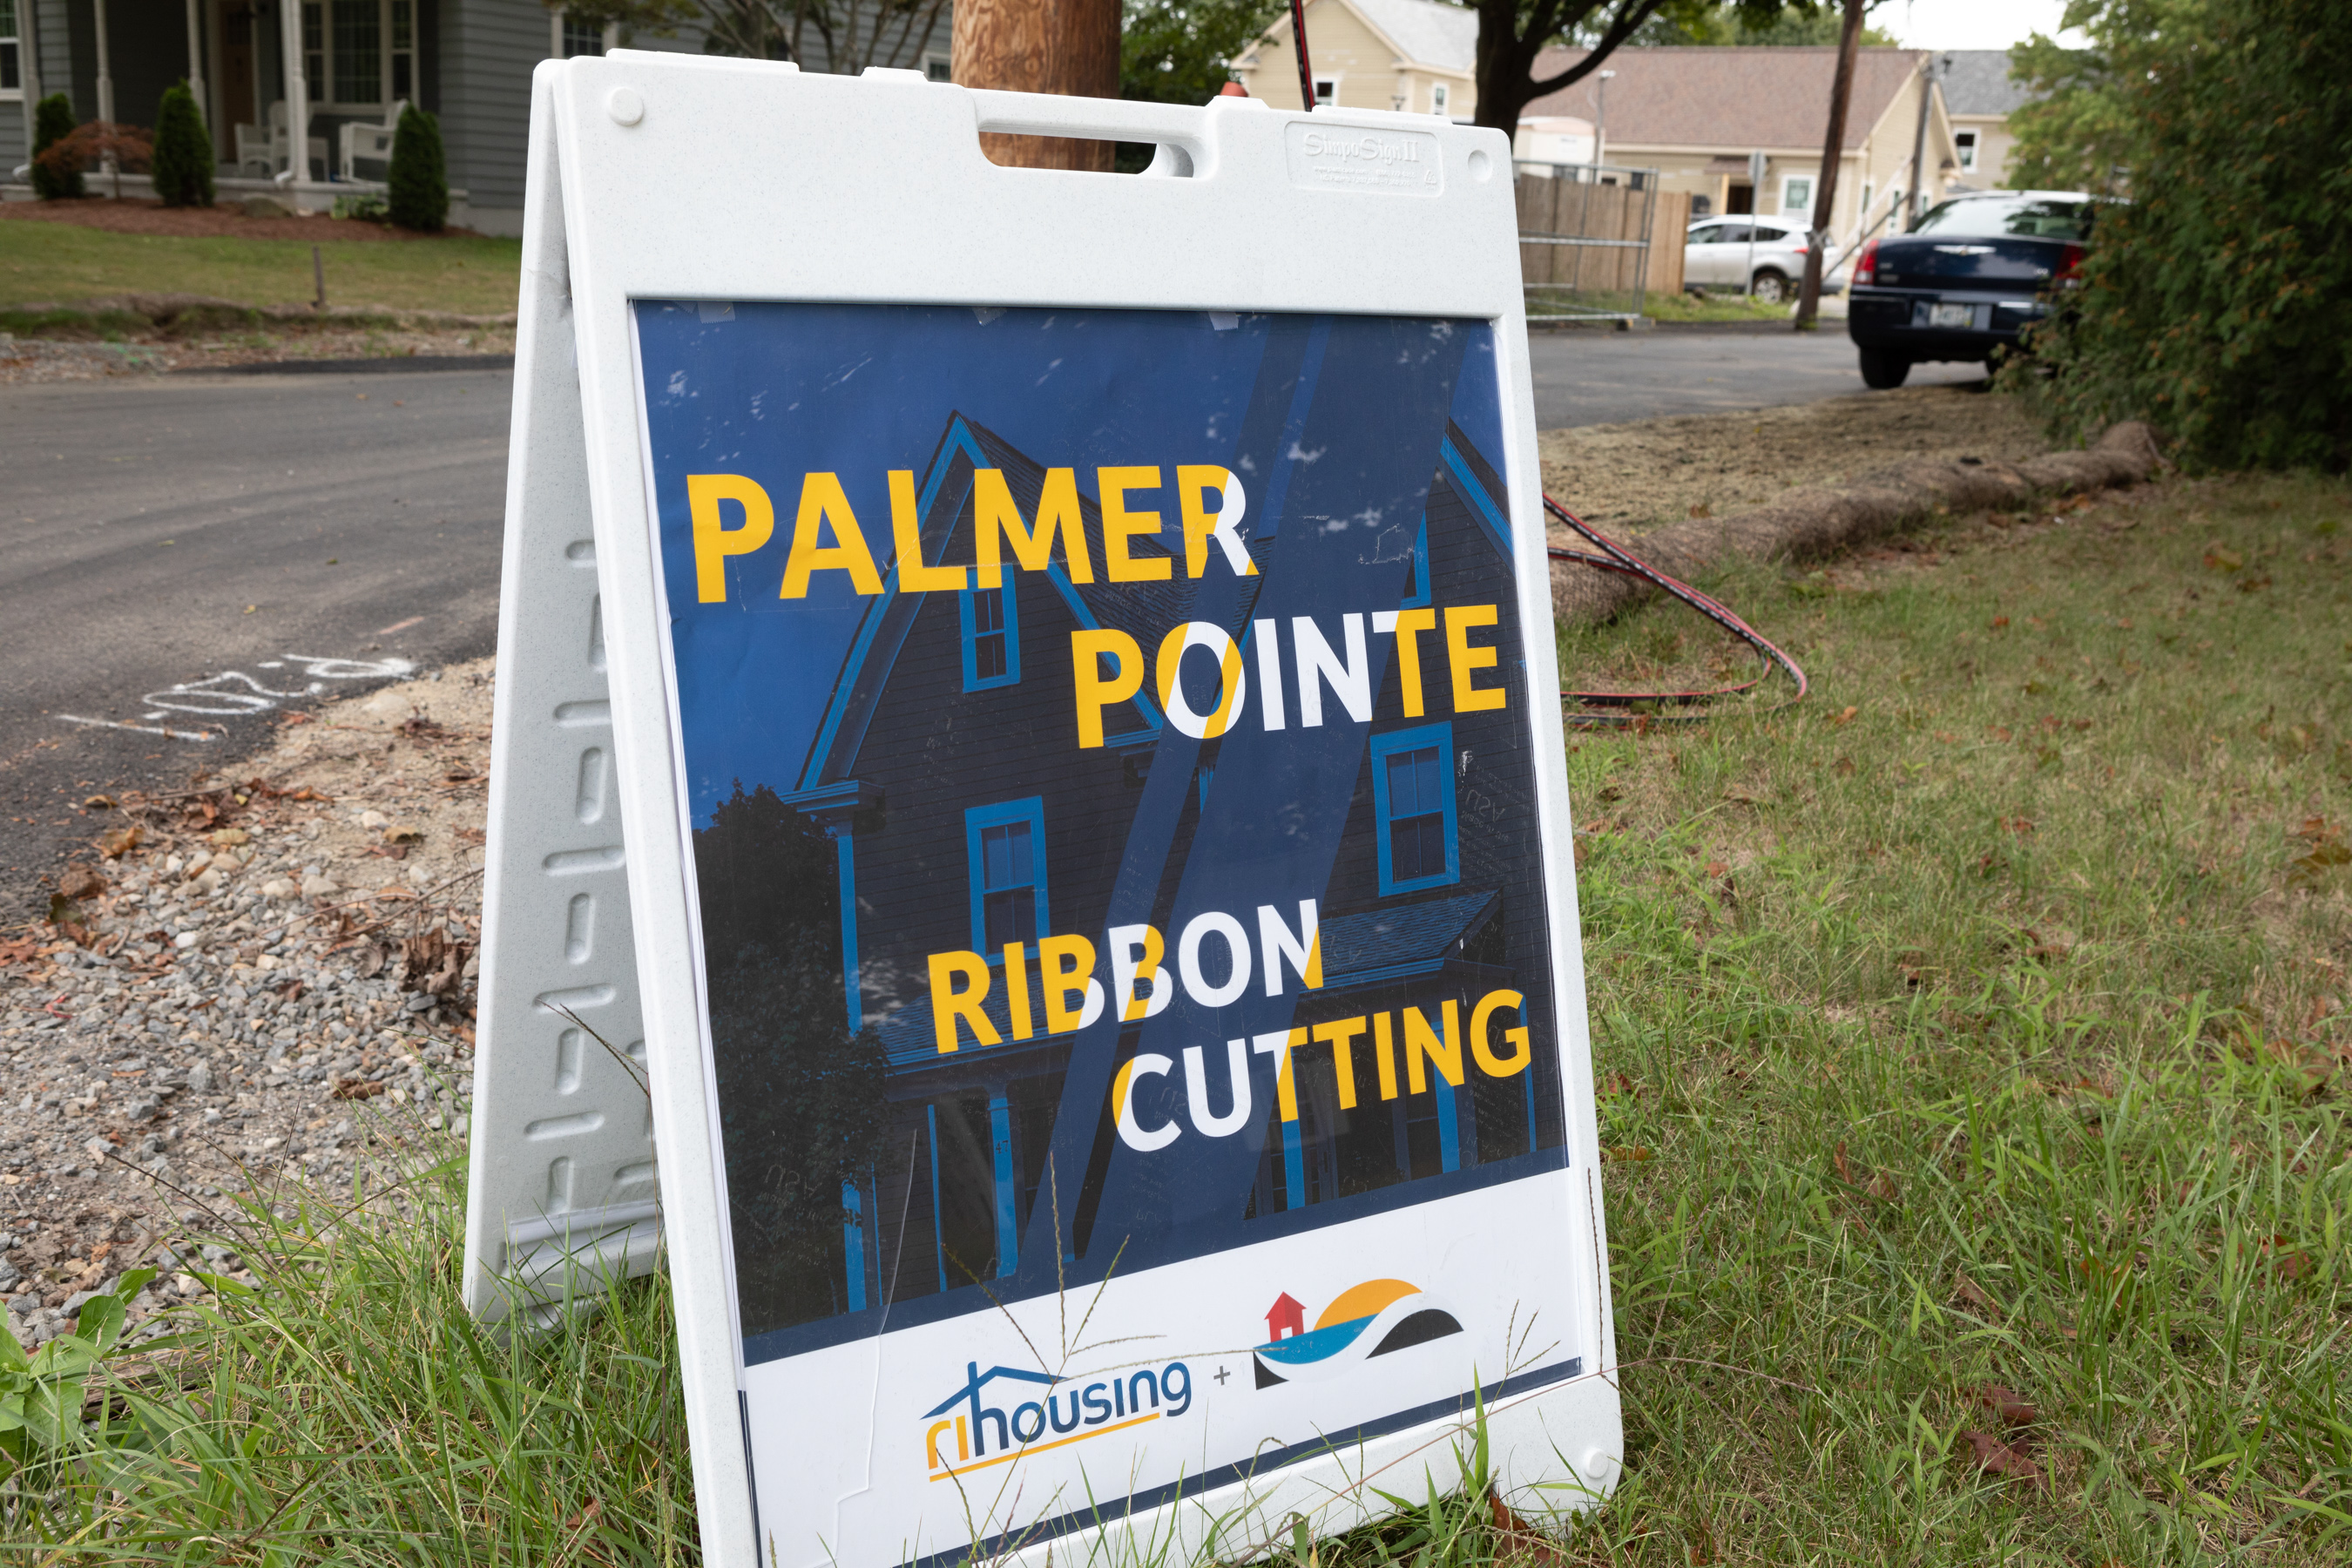 Palmer Pointe Ribbon cutting ceremony sign